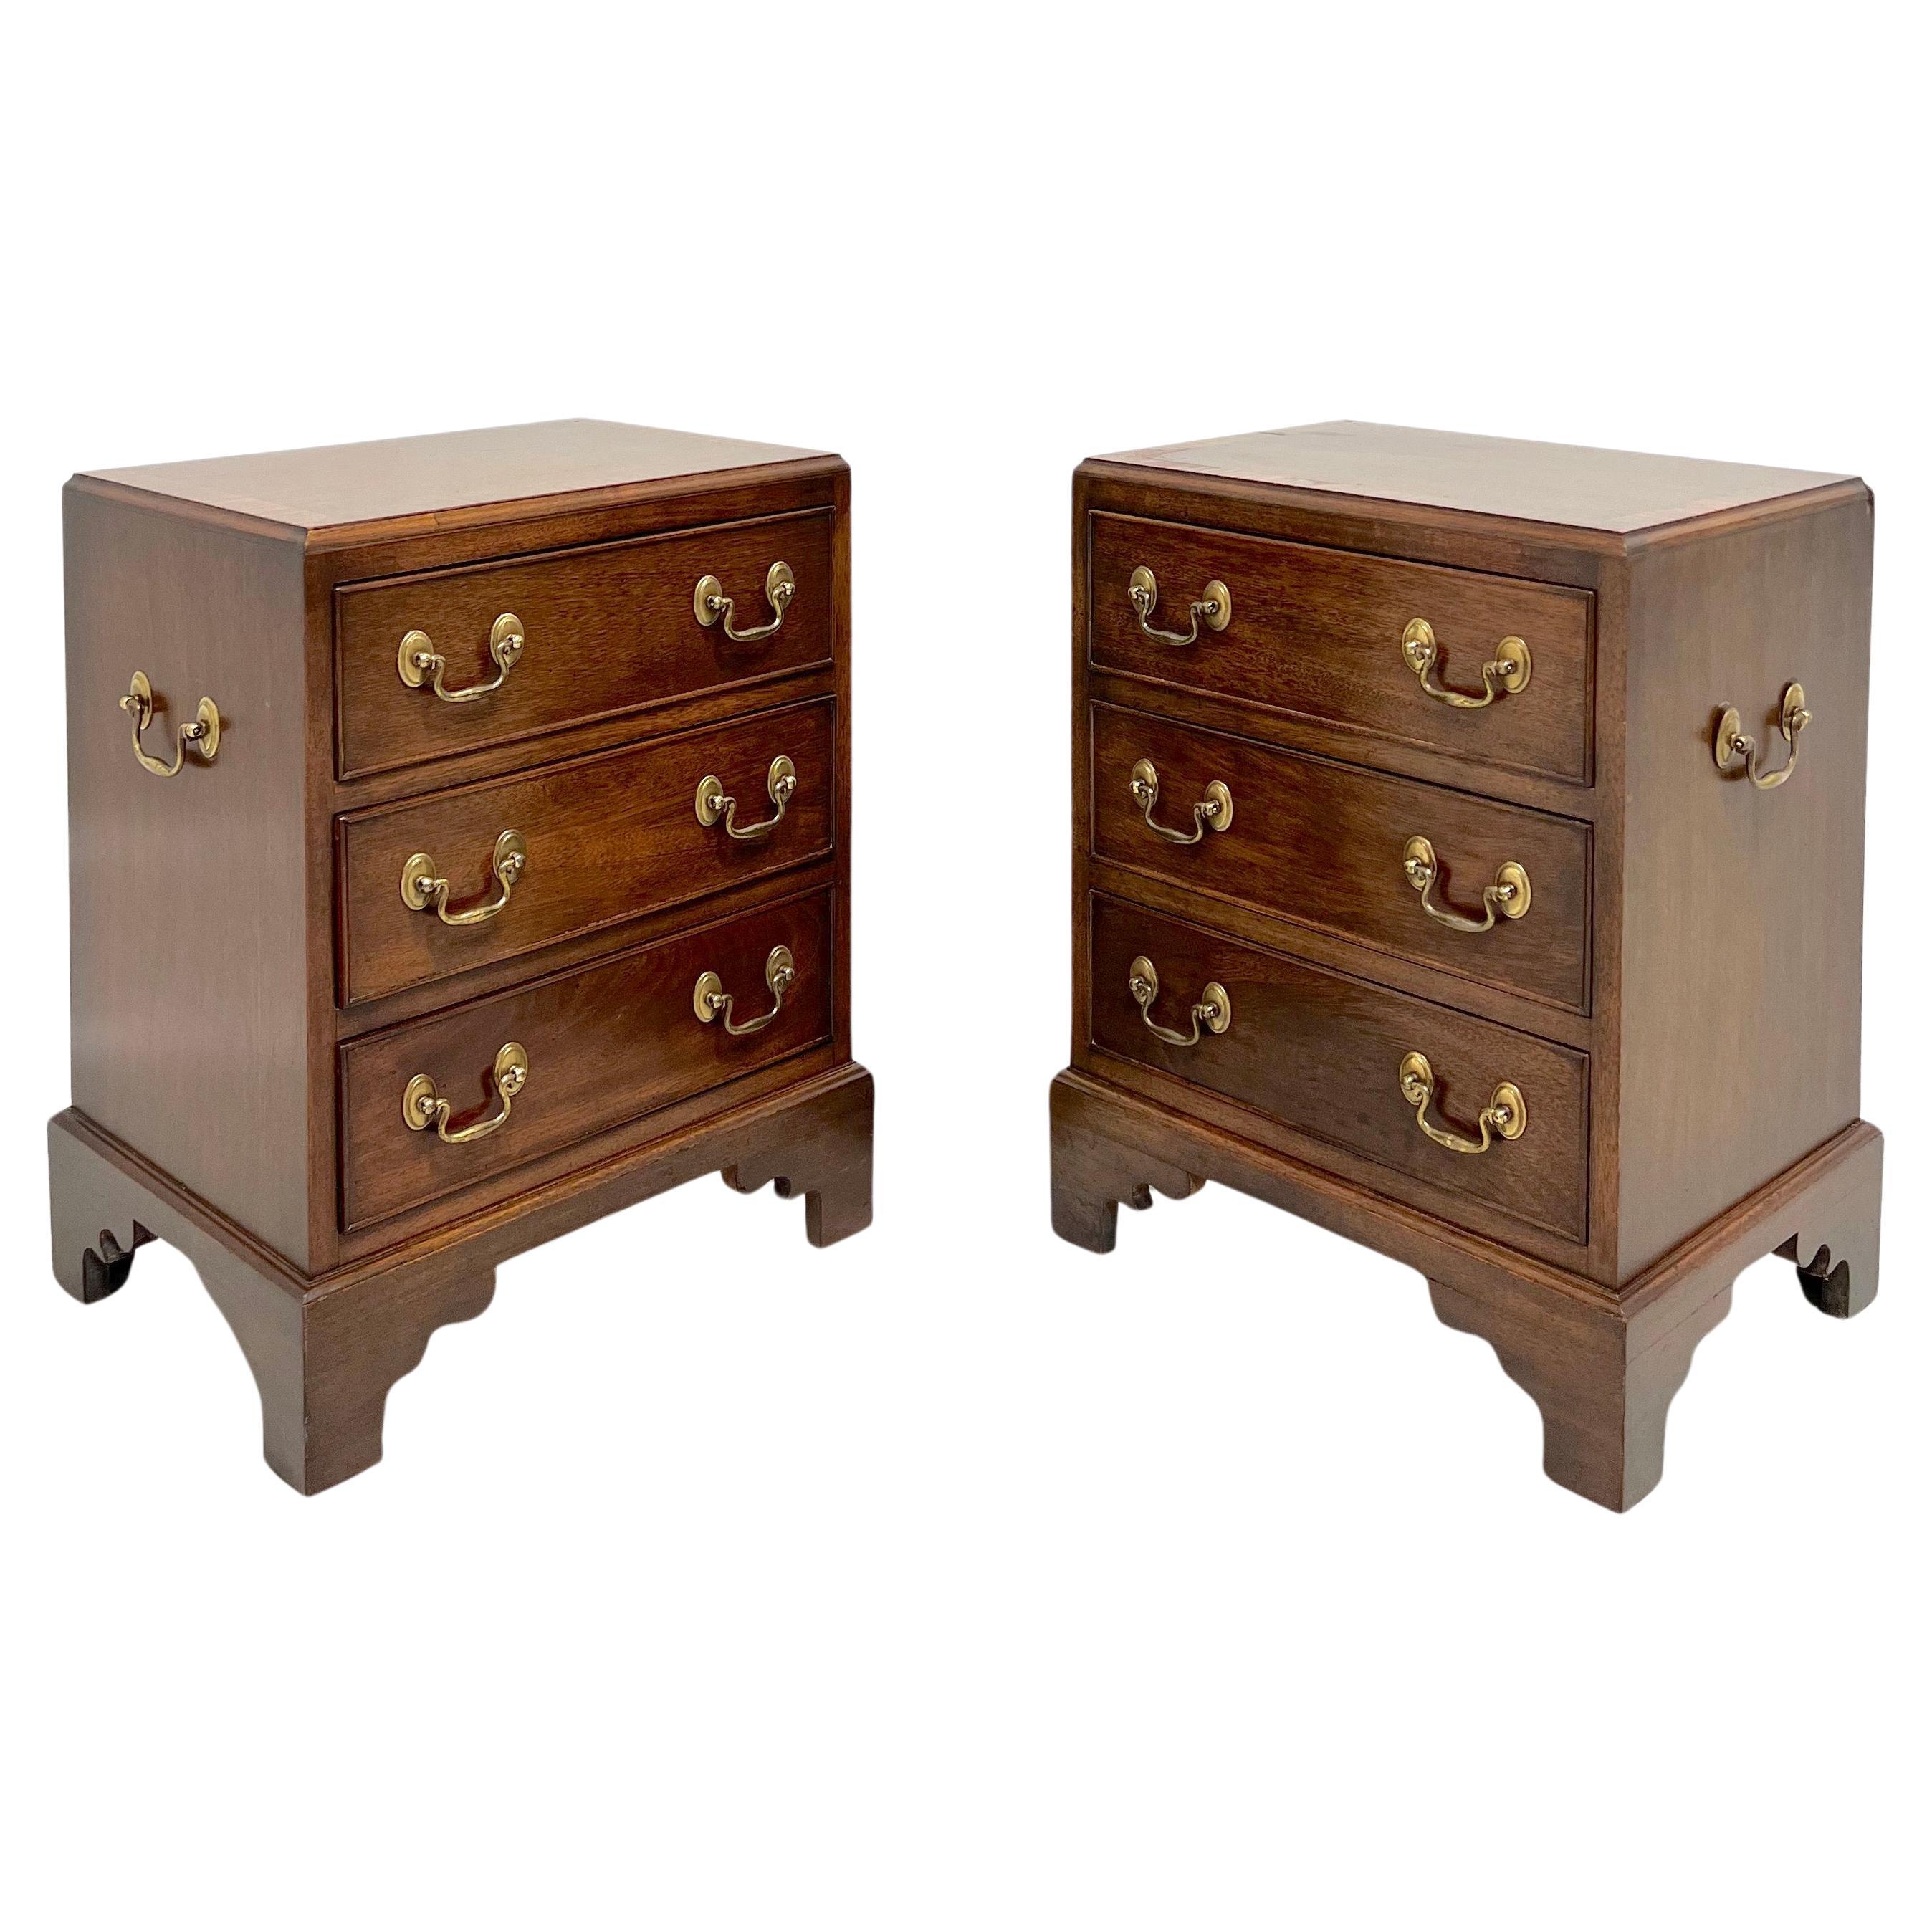 Mid 20th Century Inlaid Banded Mahogany Diminutive Bedside Chests - Pair